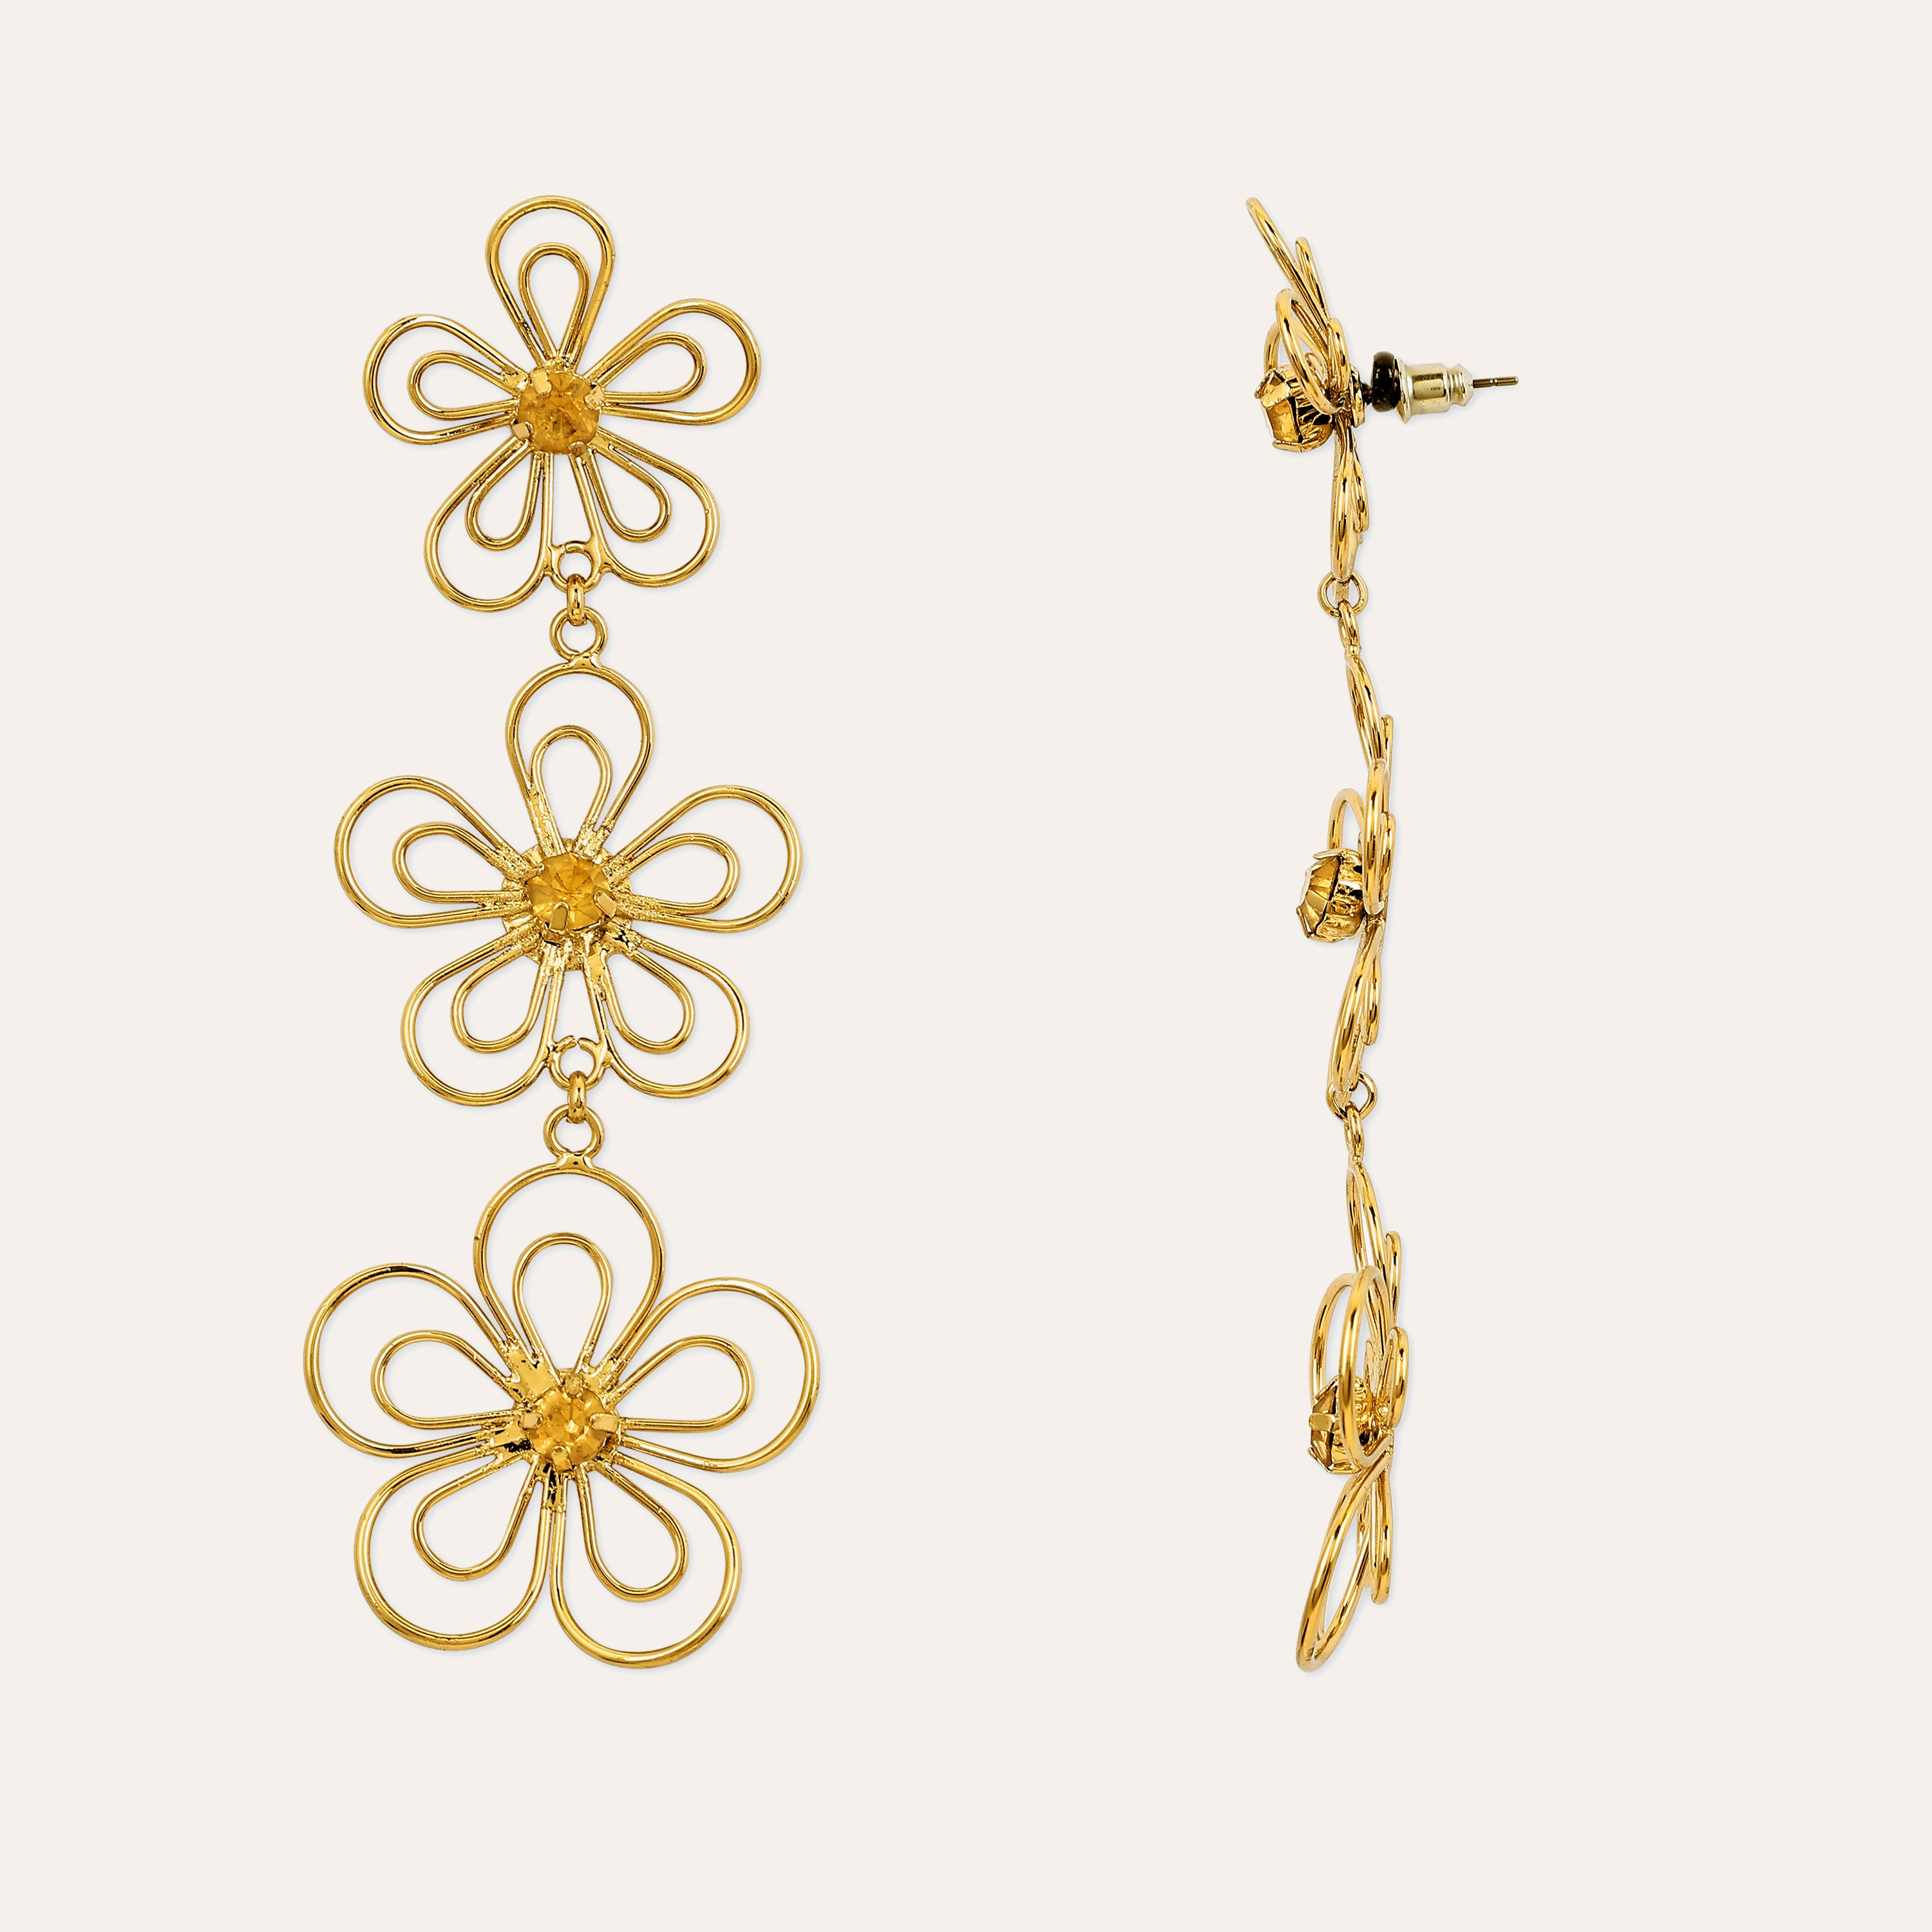 TFC Floral treasures gold plated statement stud earrings-Discover daily wear gold earrings including stud earrings, hoop earrings, and pearl earrings, perfect as earrings for women and earrings for girls.Find the cheapest fashion jewellery which is anti-tarnish only at The Fun company